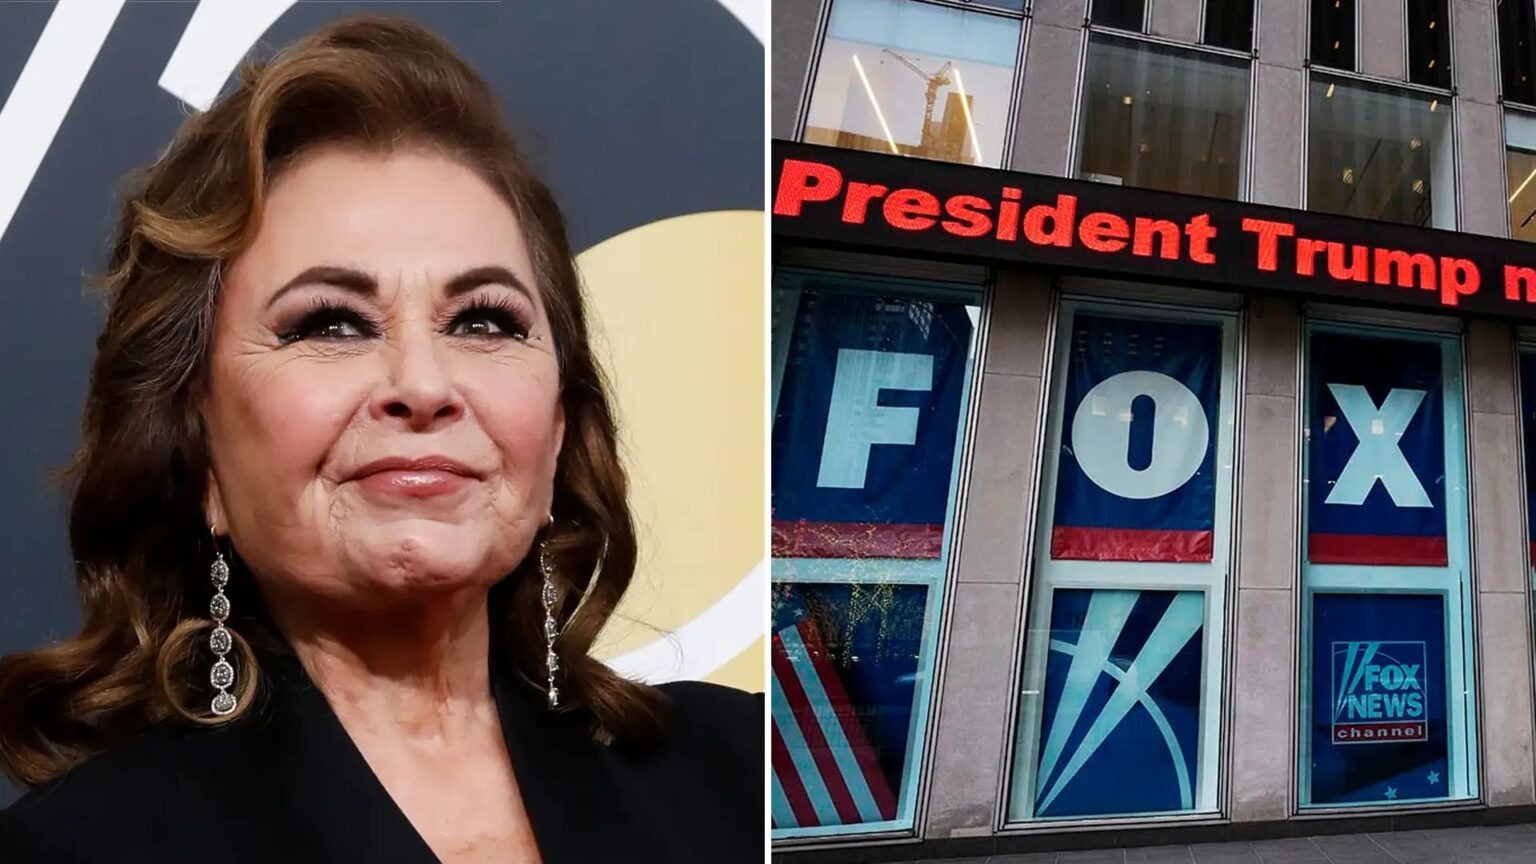 Roseanne Barr signs a 1 billion contract with Fox News for her